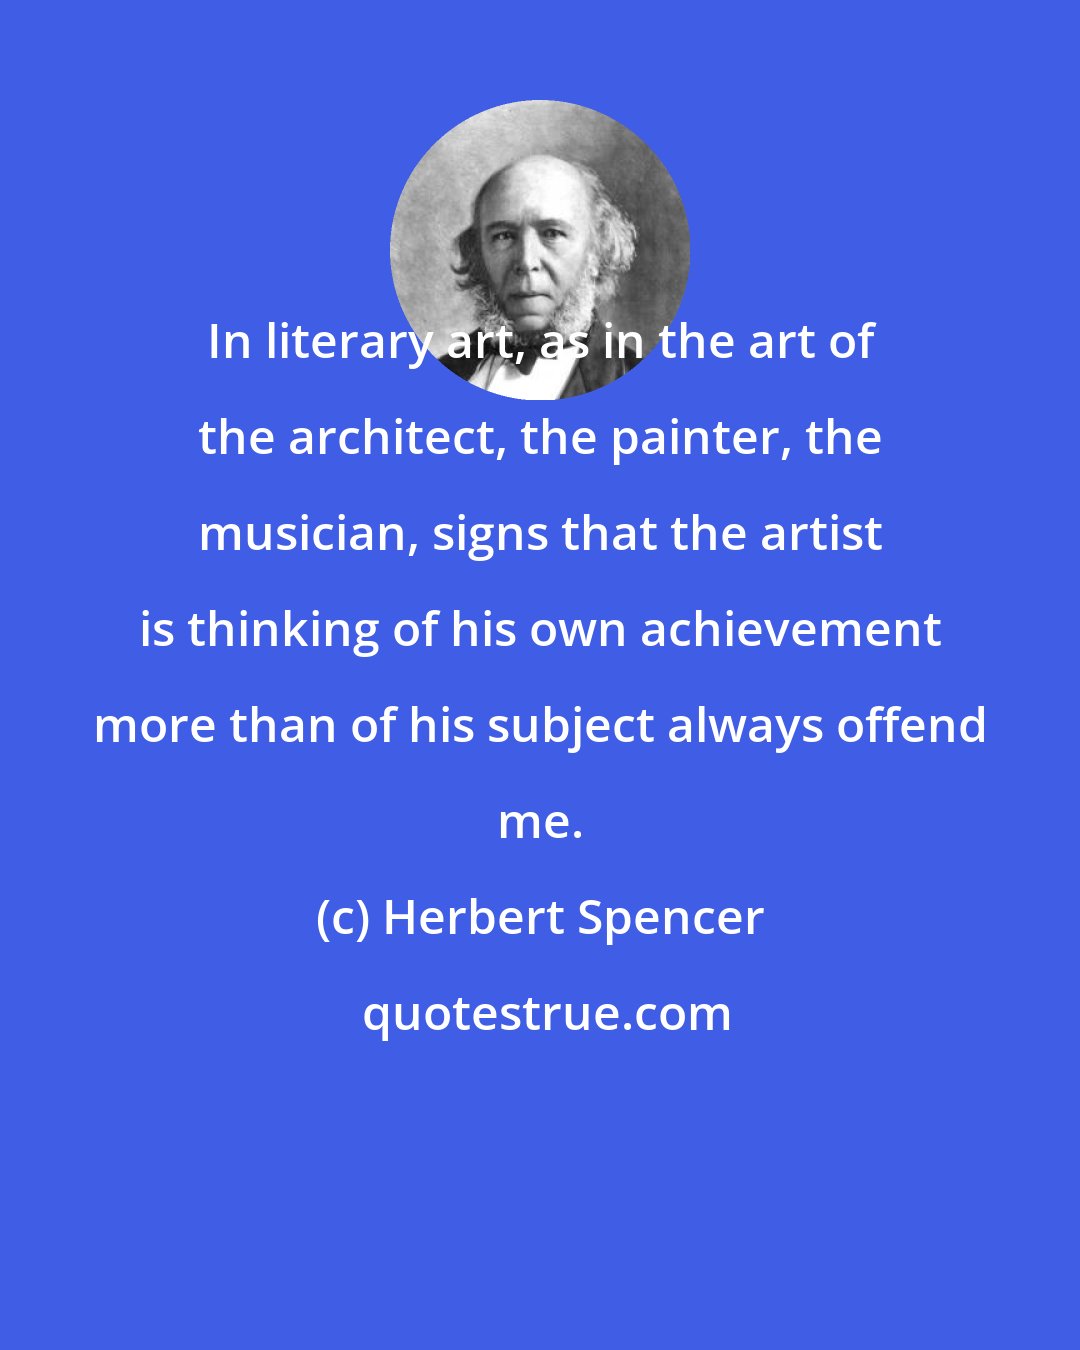 Herbert Spencer: In literary art, as in the art of the architect, the painter, the musician, signs that the artist is thinking of his own achievement more than of his subject always offend me.